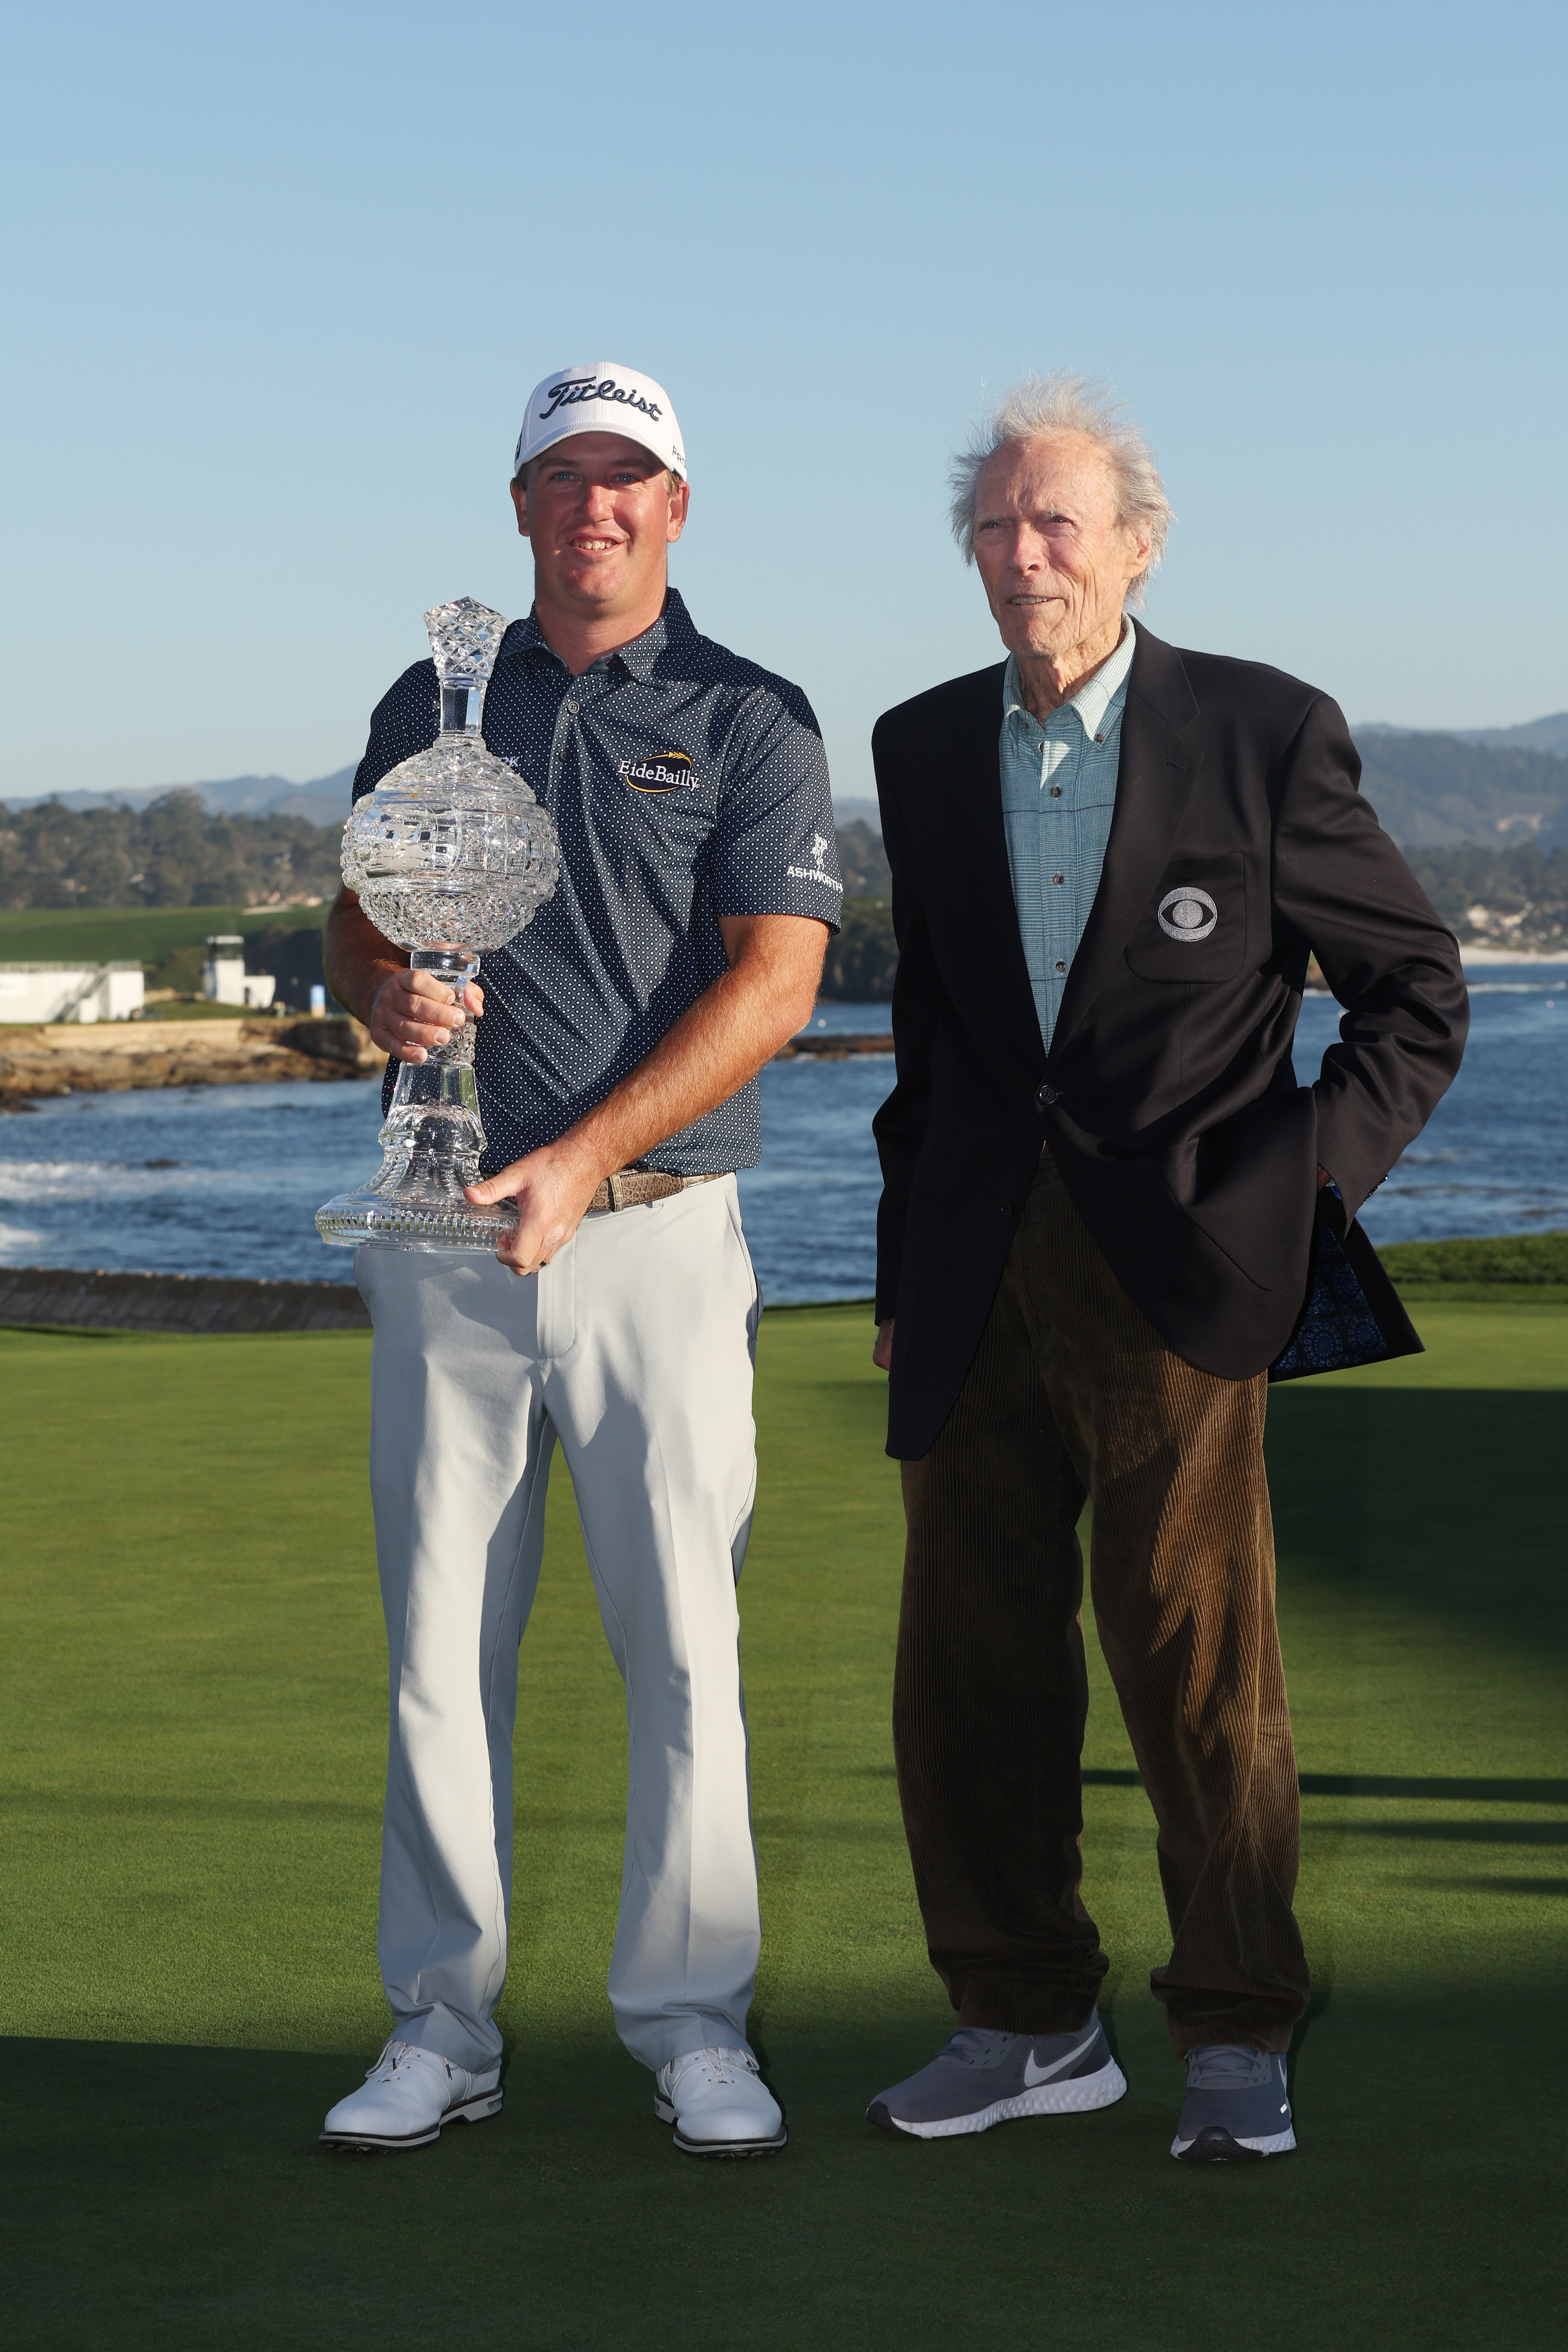 Clint Eastwood poses with Tom Hoge who won the final round of the AT&T Pebble Beach Pro-Am at Pebble Beach Golf Links on February 6, 2022, in Pebble Beach, California. | Source: Getty Images